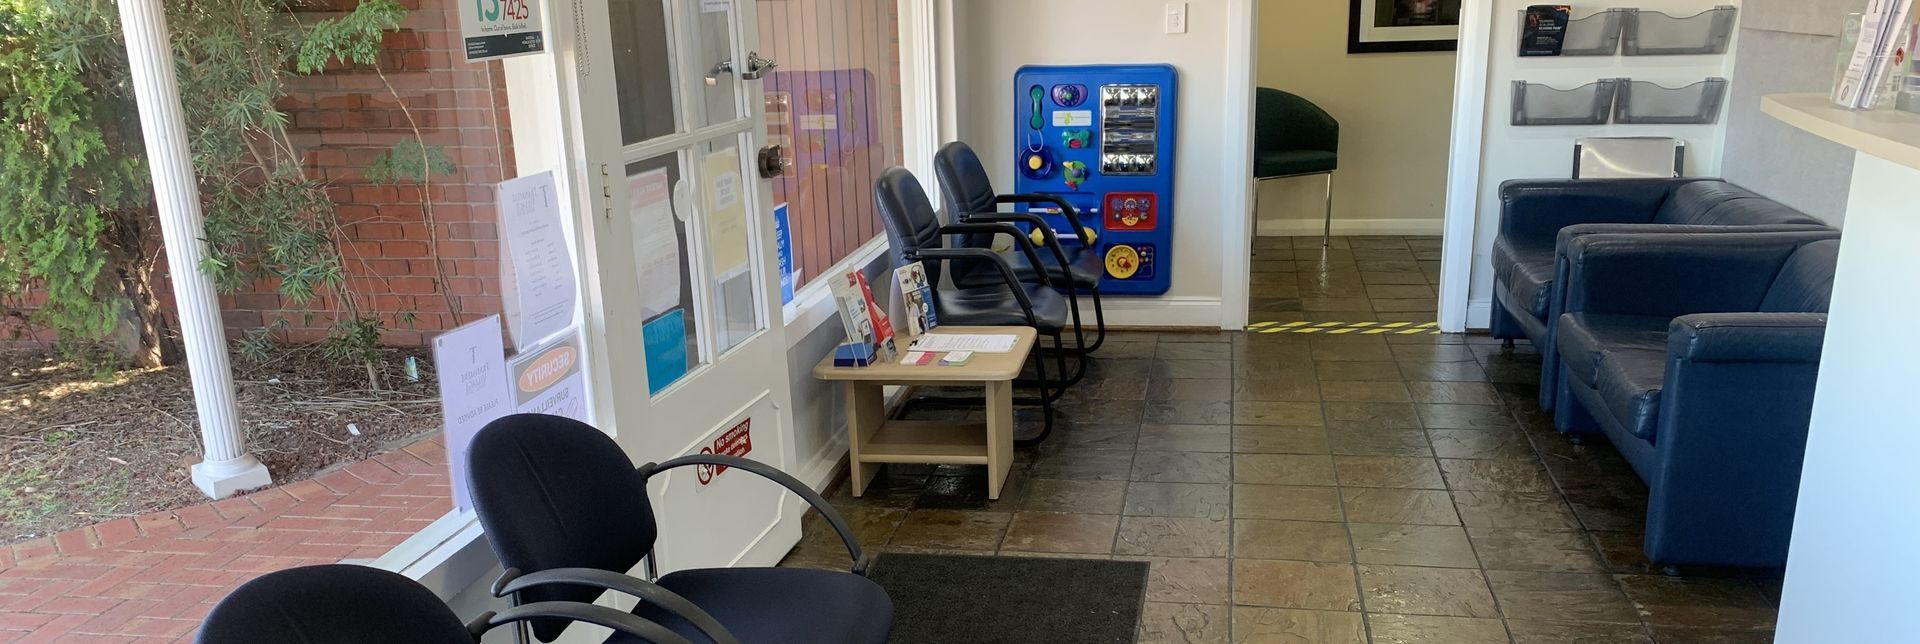 Tranmere Village Medical Centre Waiting Area